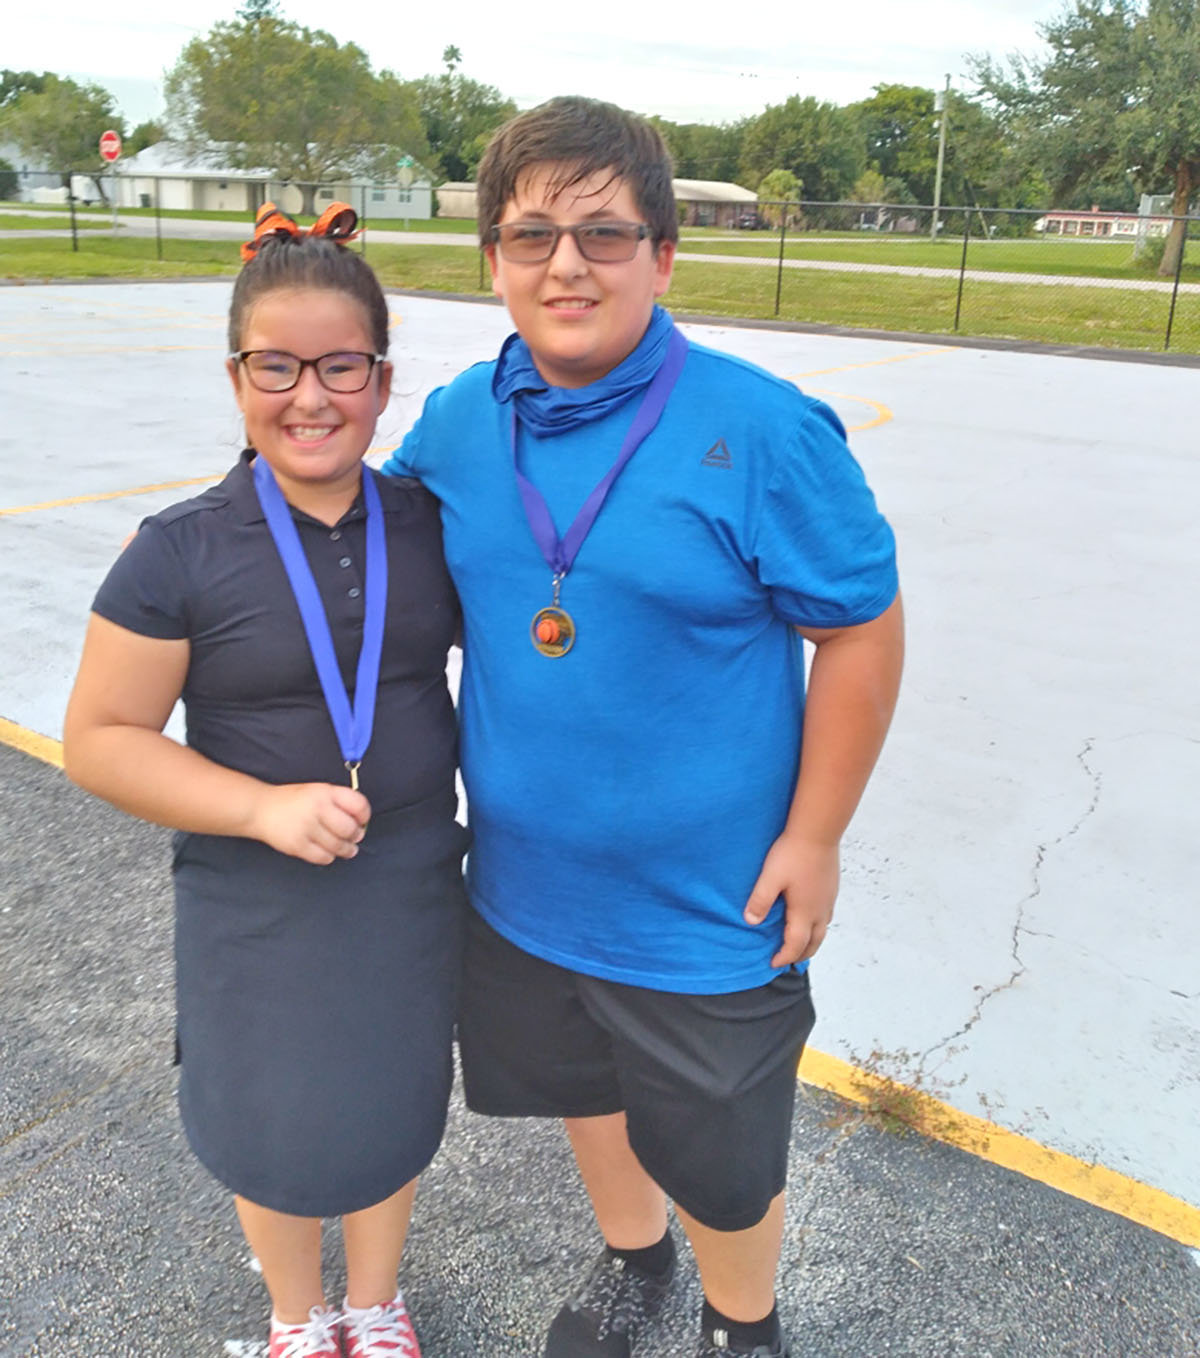 On the left is Rachel Gonzalez with her brother Daniel Gonzalez on the right. Both were first place winners at the Elks Hoop Shoot on Tuesday, Nov. 9.